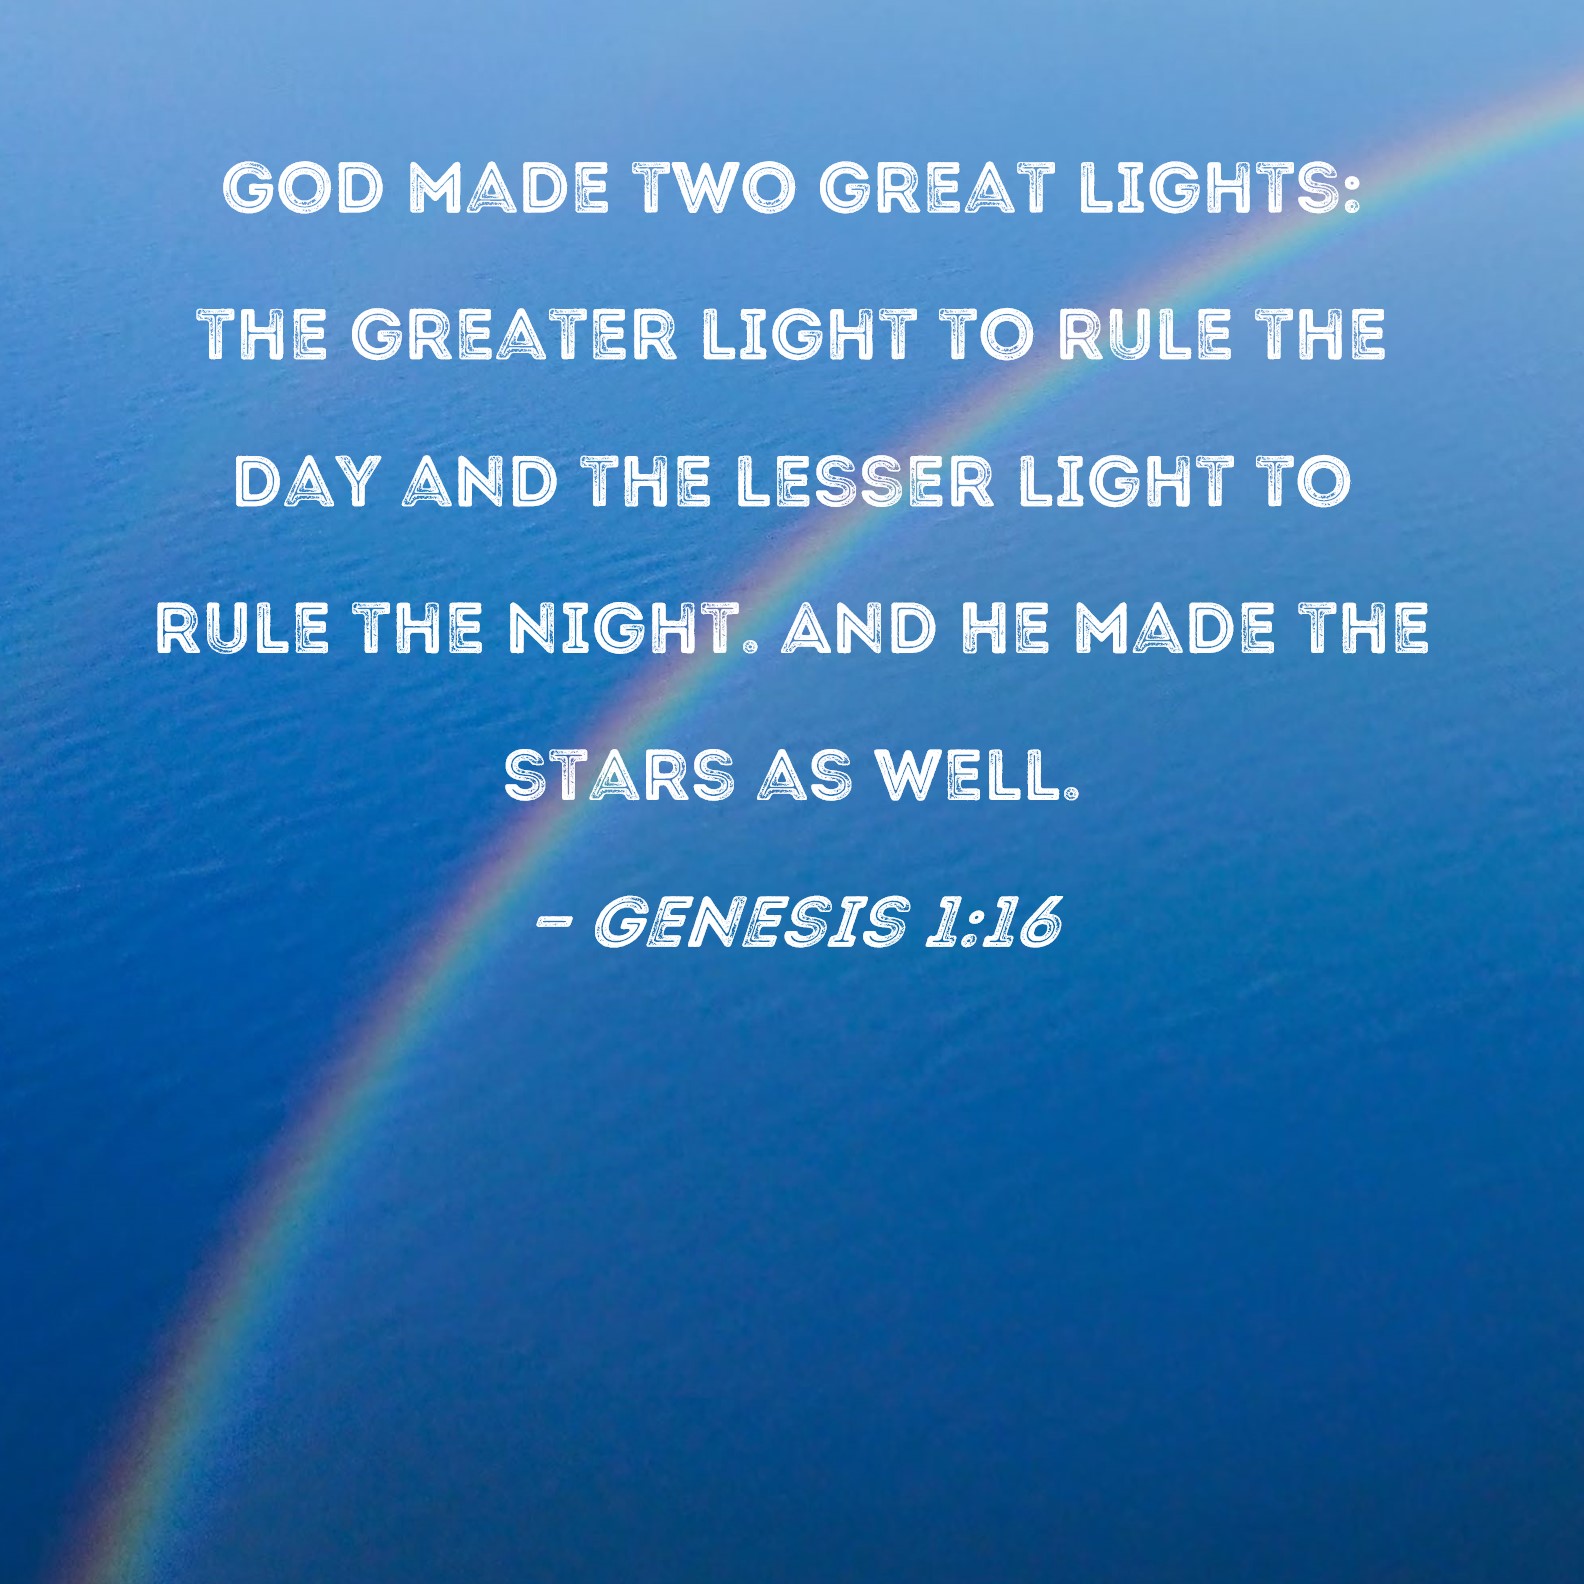 Genesis 1:16 God made two great lights: the greater light to rule